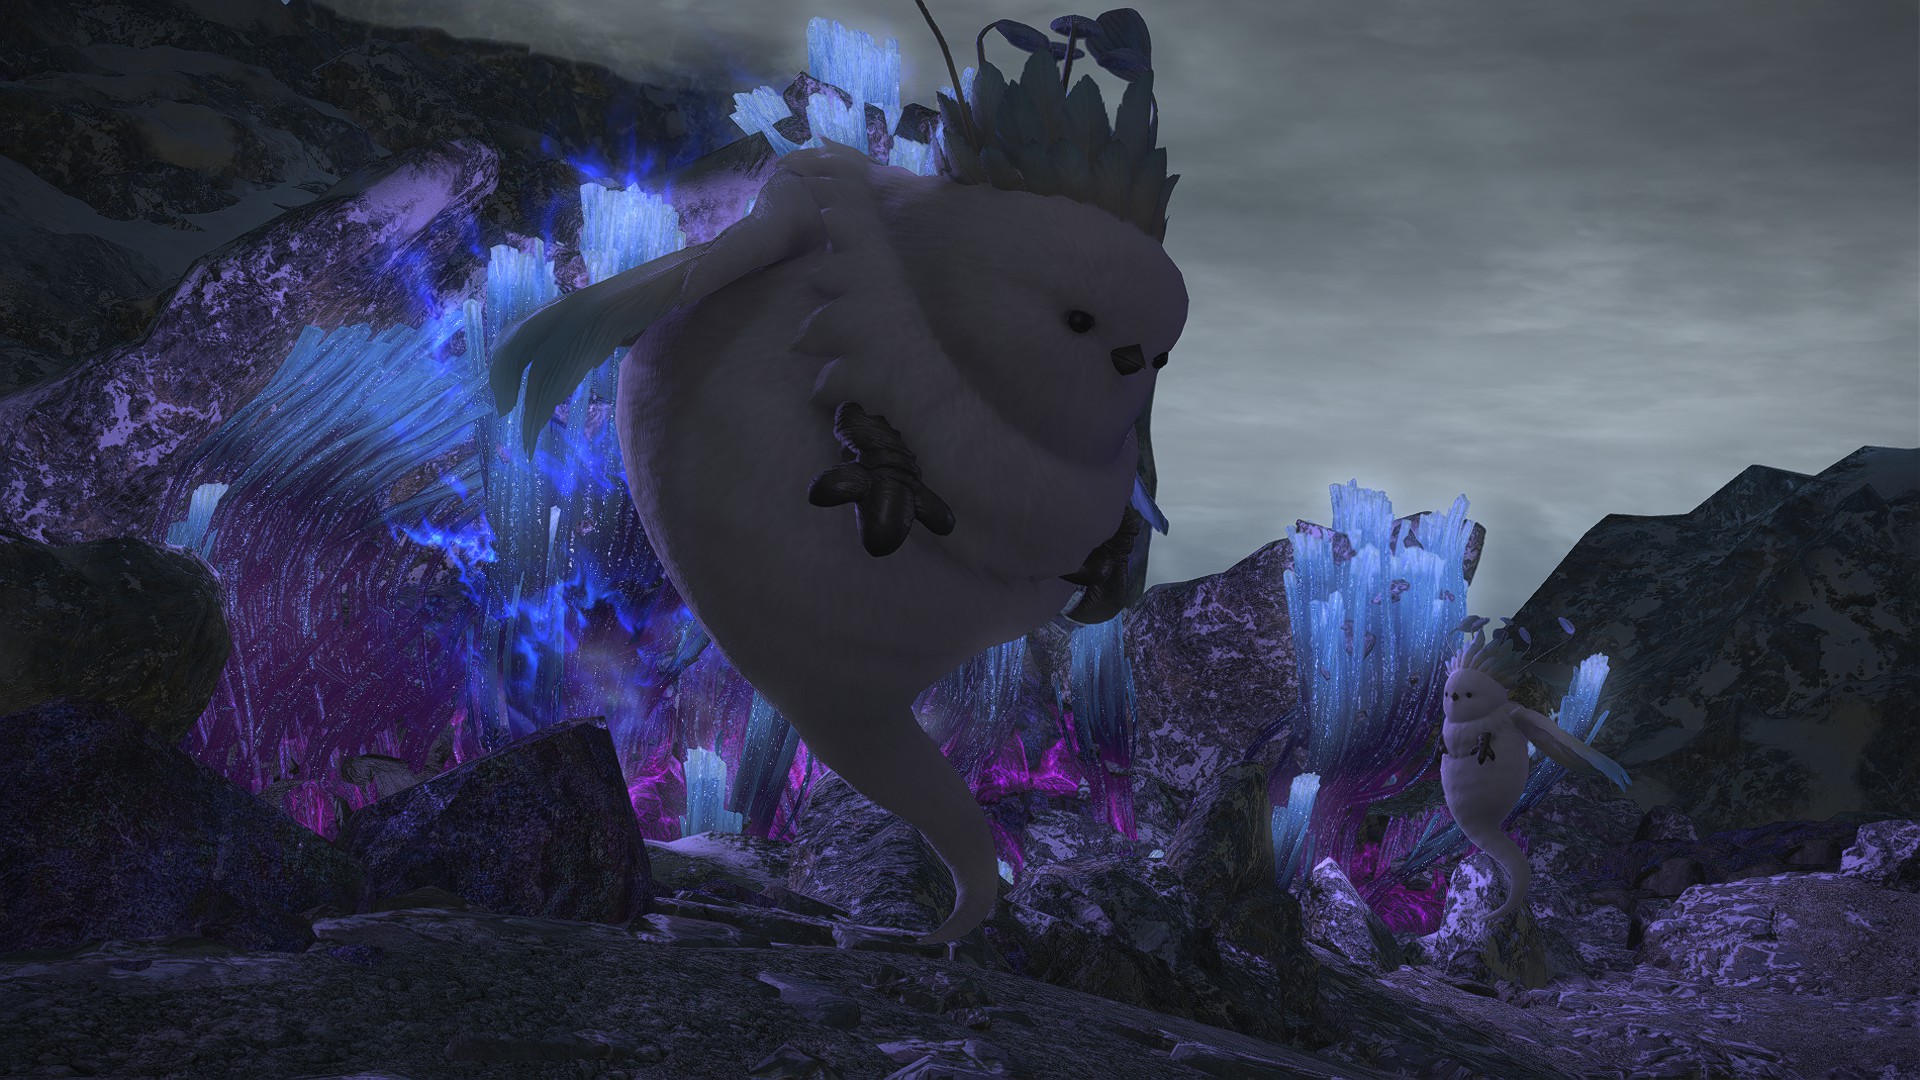 A cute critter in a mountain range dungeon featured in Final Fantasy 14: Dawntrail floats, surrounded by magic crystals.